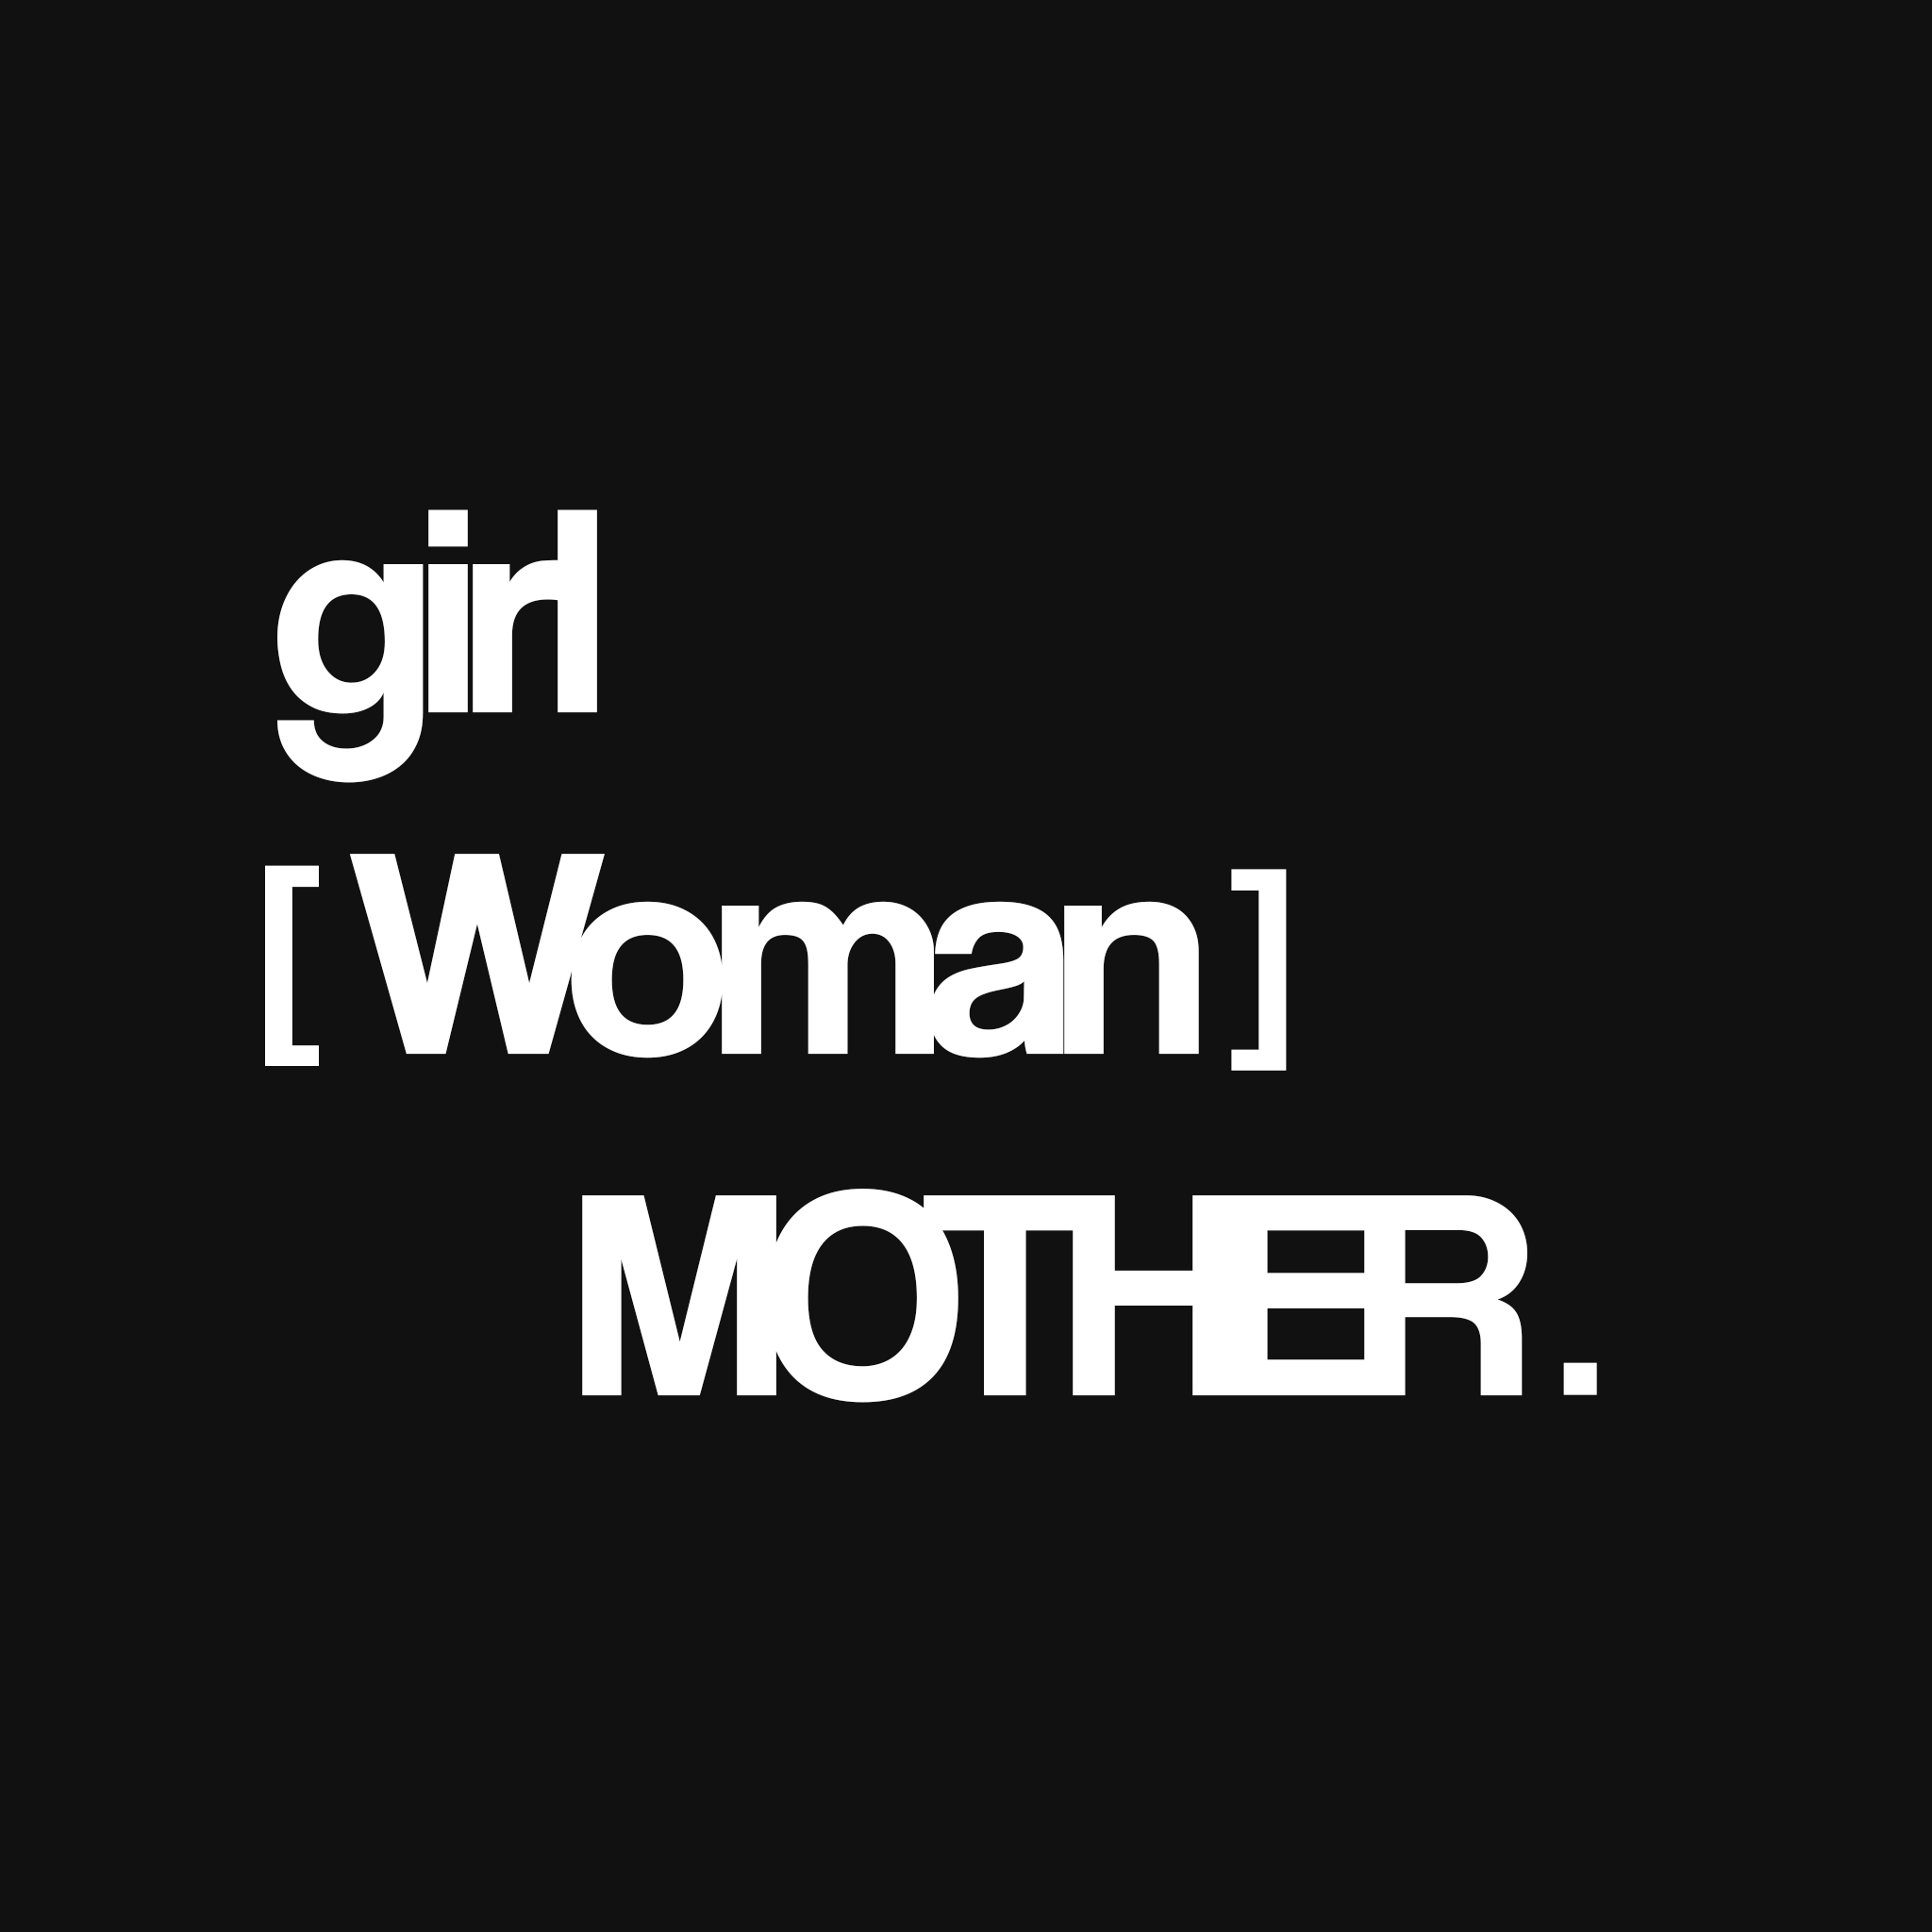 White text on a black background that says girl, [WOMAN], Mother